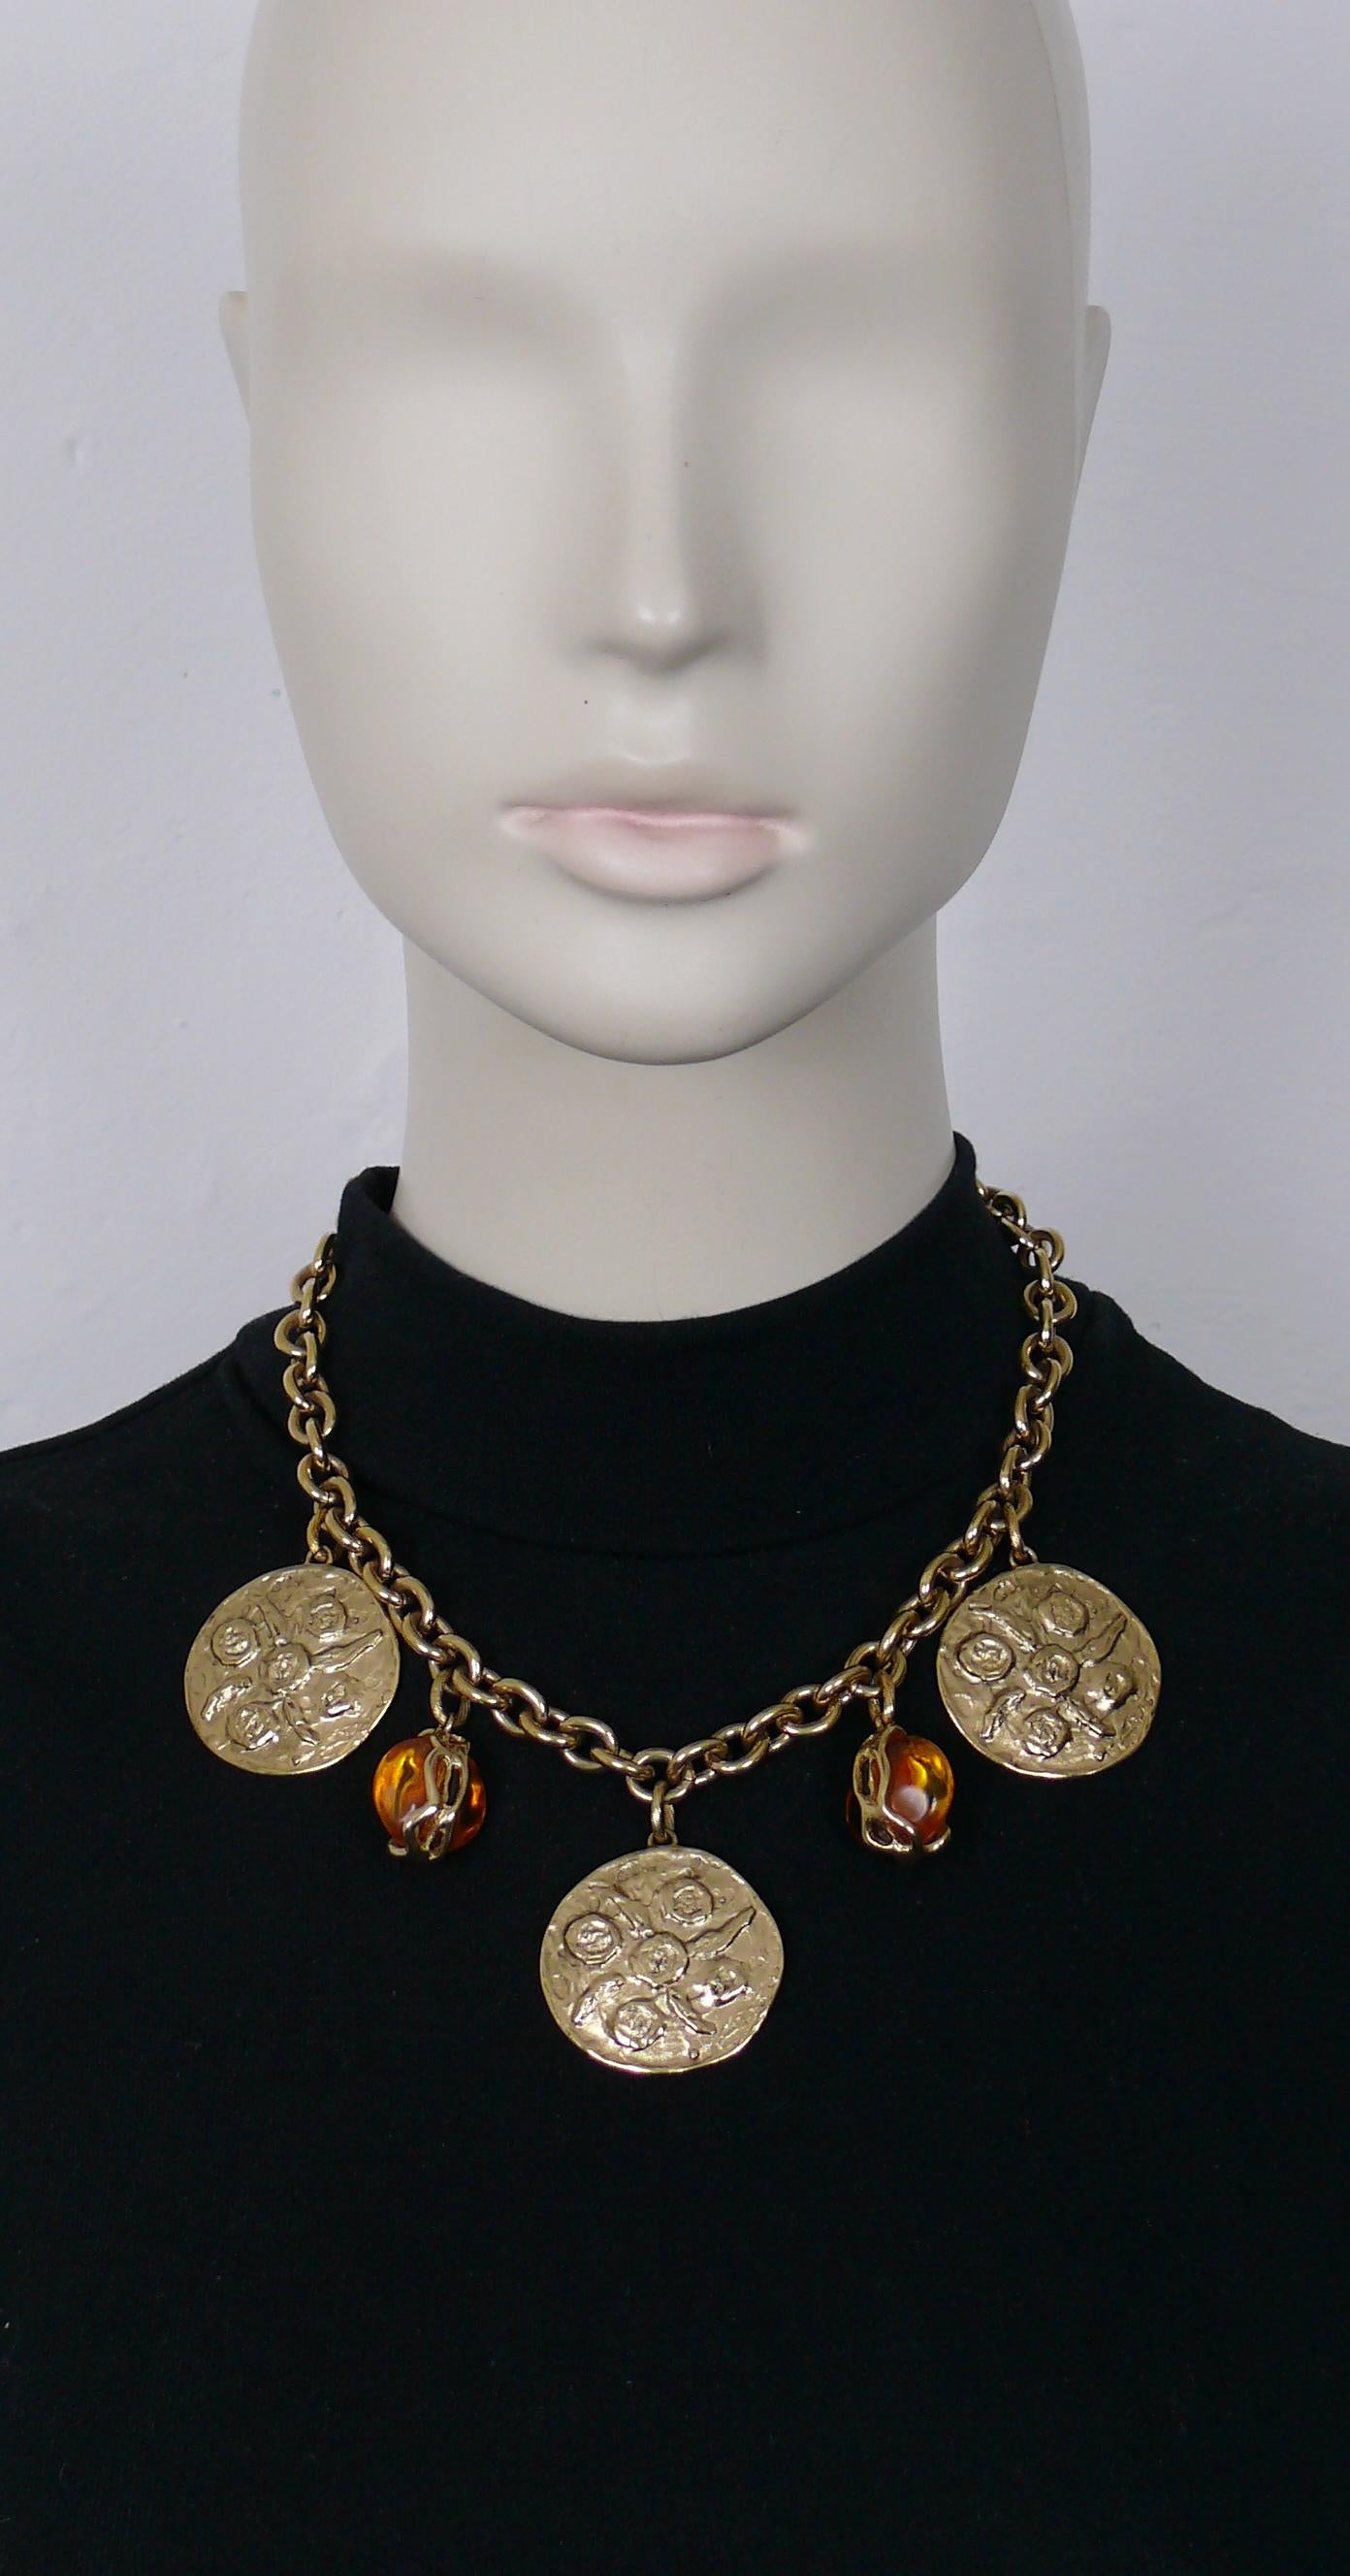 YVES SAINT LAURENT vintage gold toned chain necklace featuring three textured coins and two orange resin drops in a gold toned setting.

Spring clasp closure.
Adjustable length.

Embossed YSL on the clasp.
Hanging metal tag marked embossed